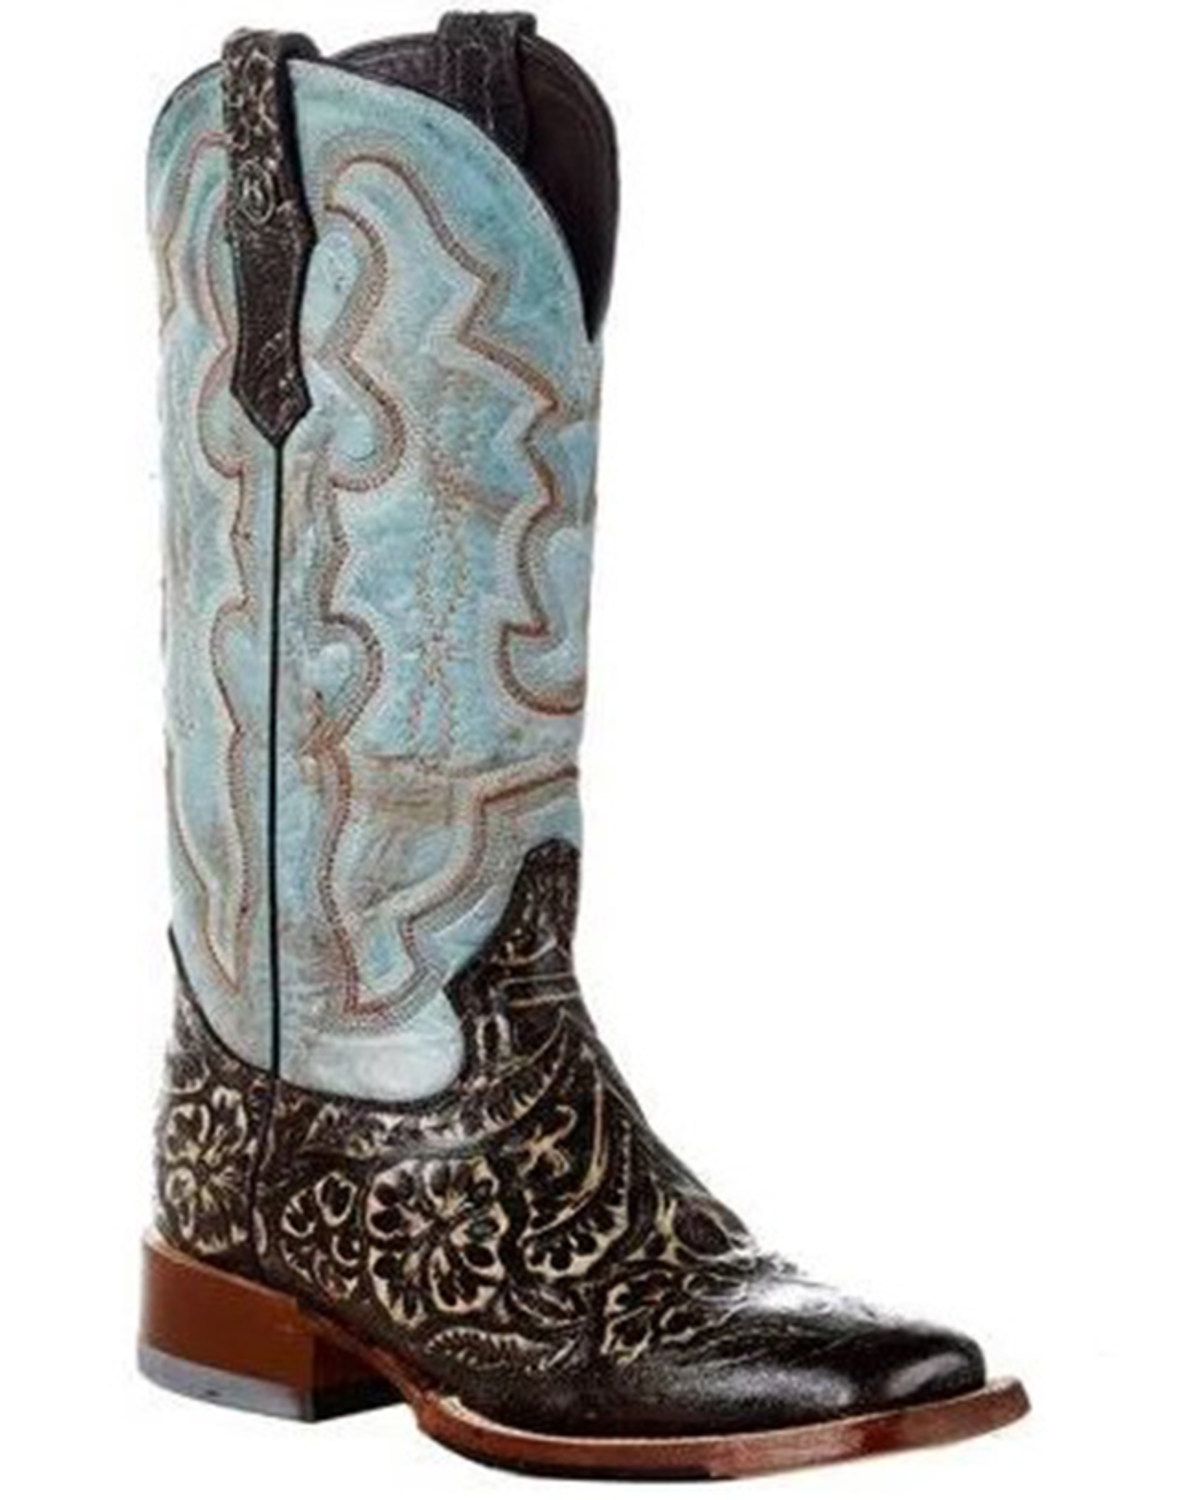 Tanner Mark Women's Tooled Western Boots - Broad Square Toe